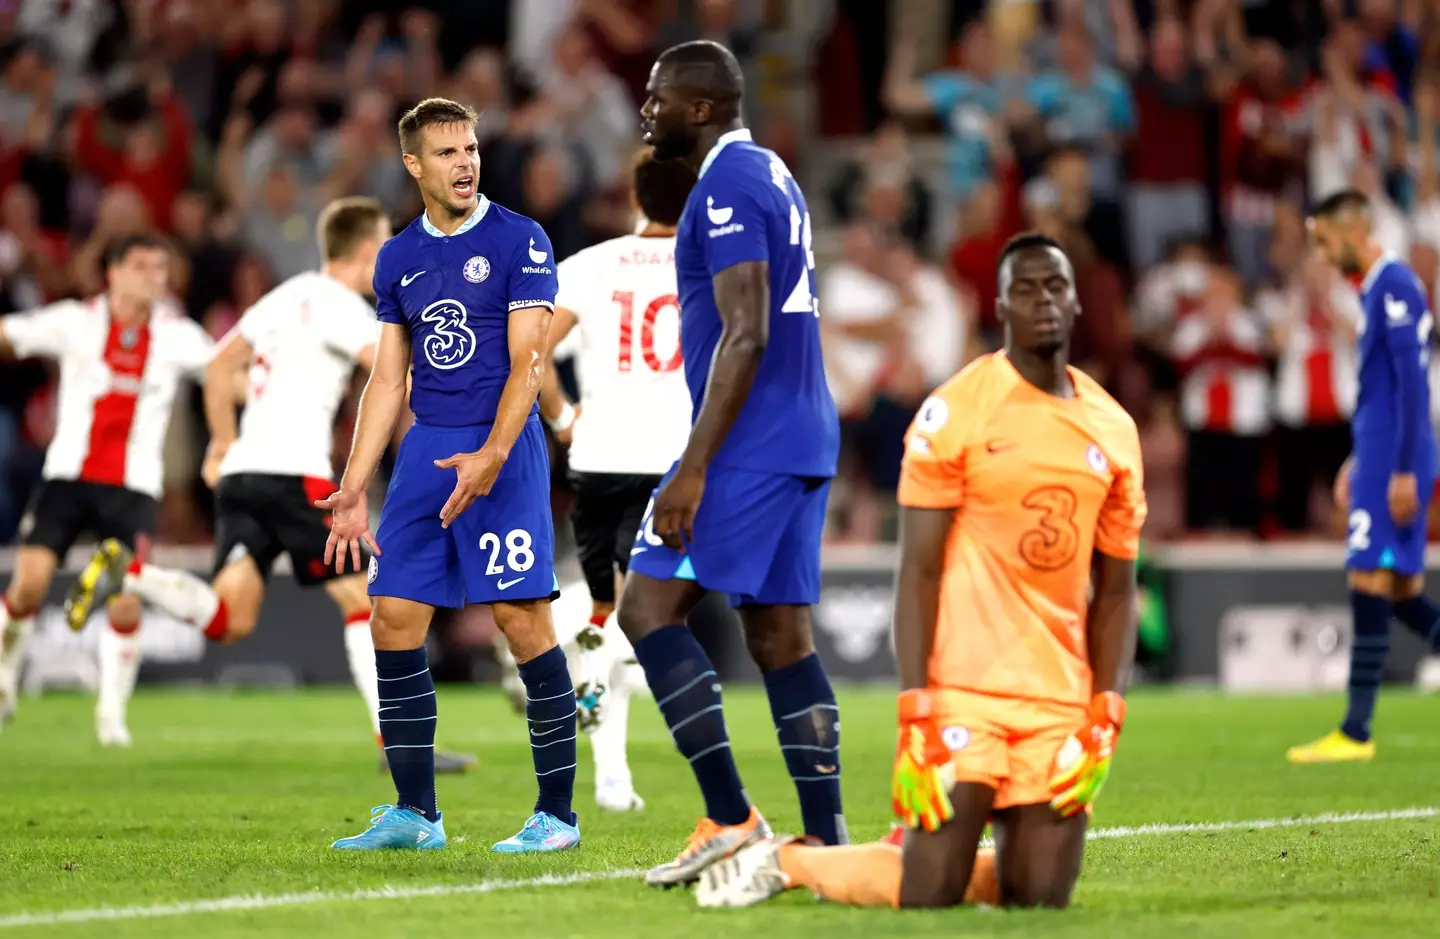 Chelsea players frustrated after conceding against Southampton. (Alamy)